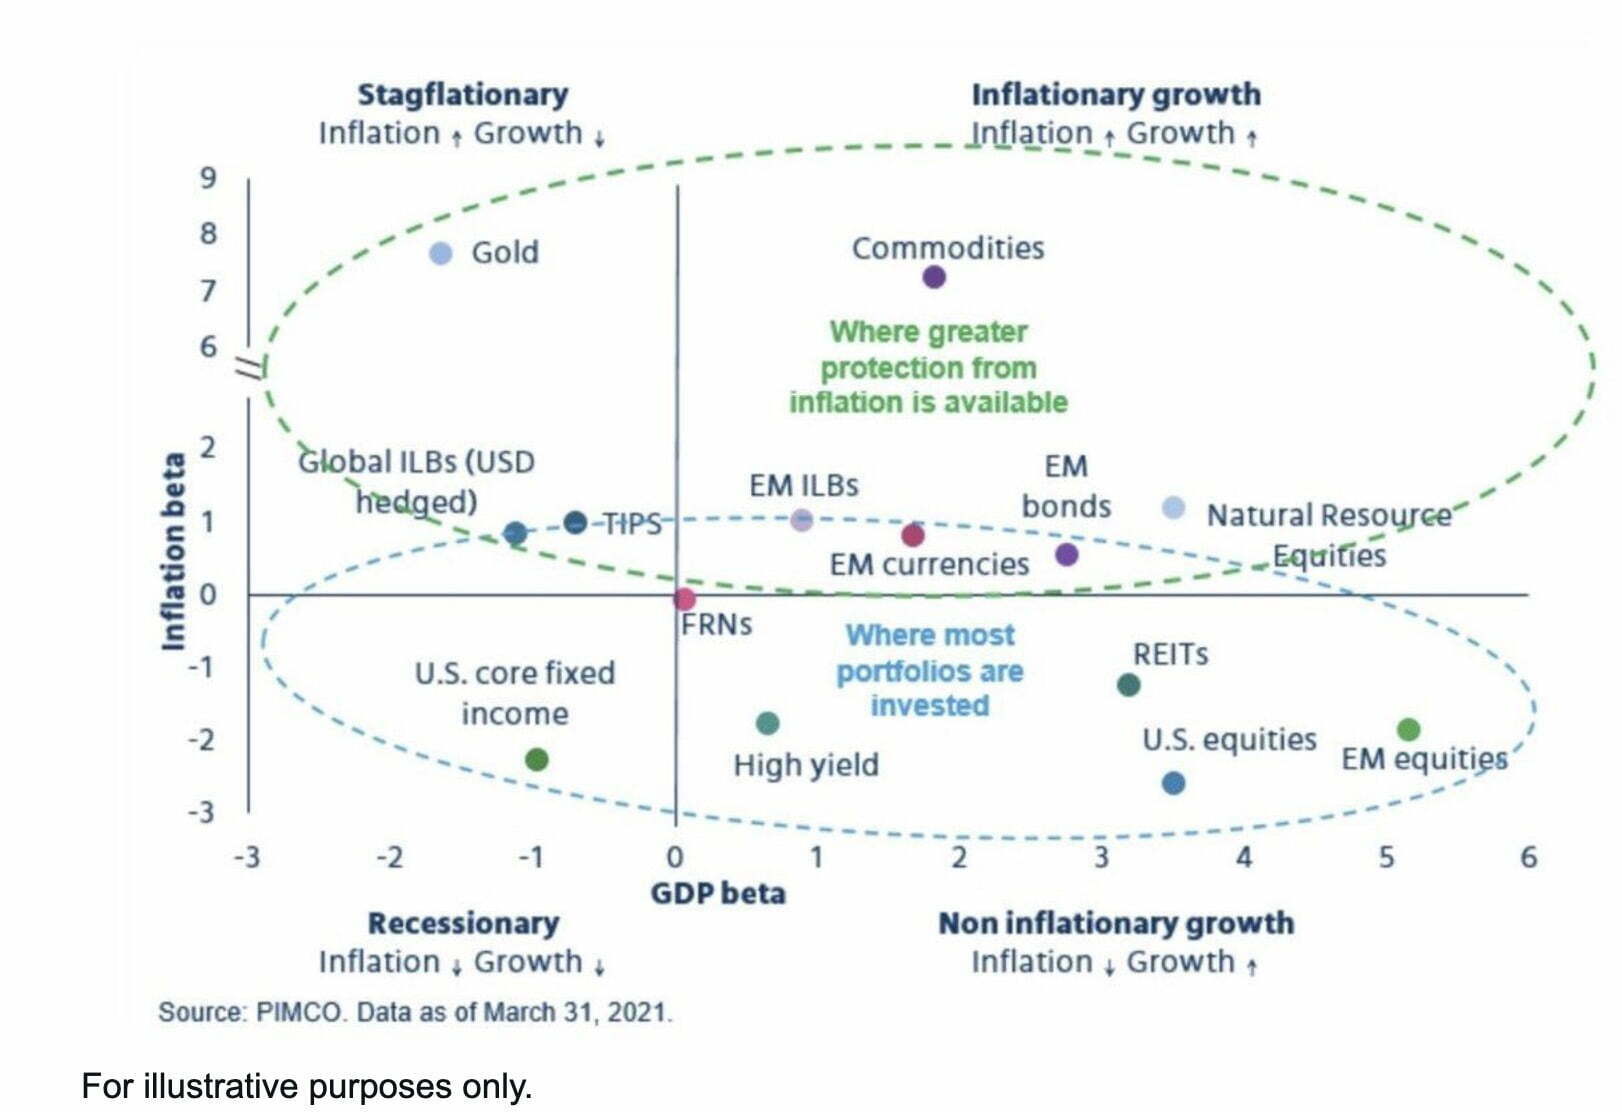 Economic Cycles and Regimes ranging from Stagflationary to Inflationary Growth to Non Inflationary Growth to Recessionary 